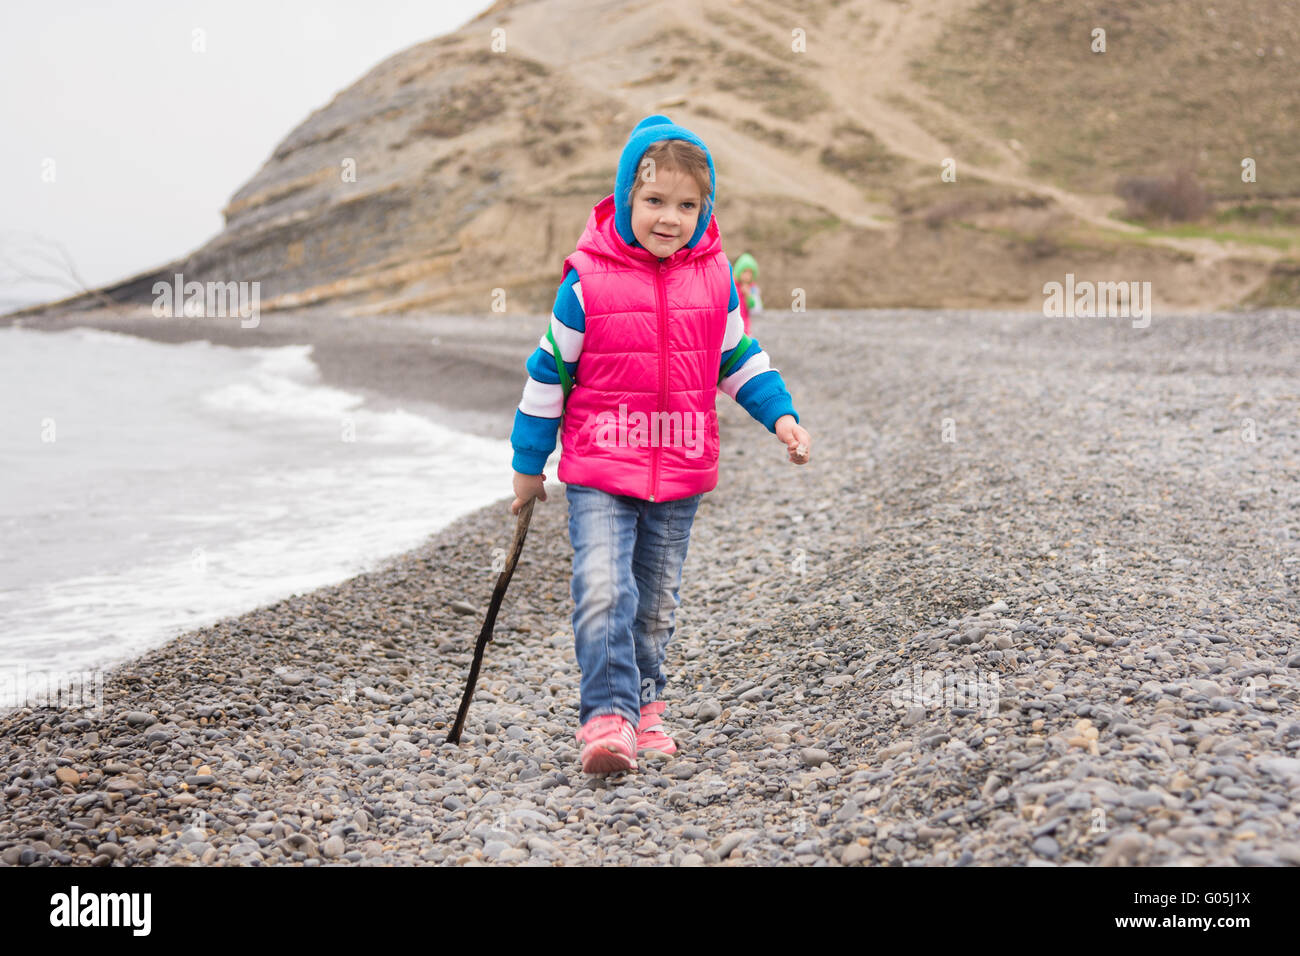 Five-year girl walking on the pebble beach in the warm bright clothes with a stick in his hand Stock Photo